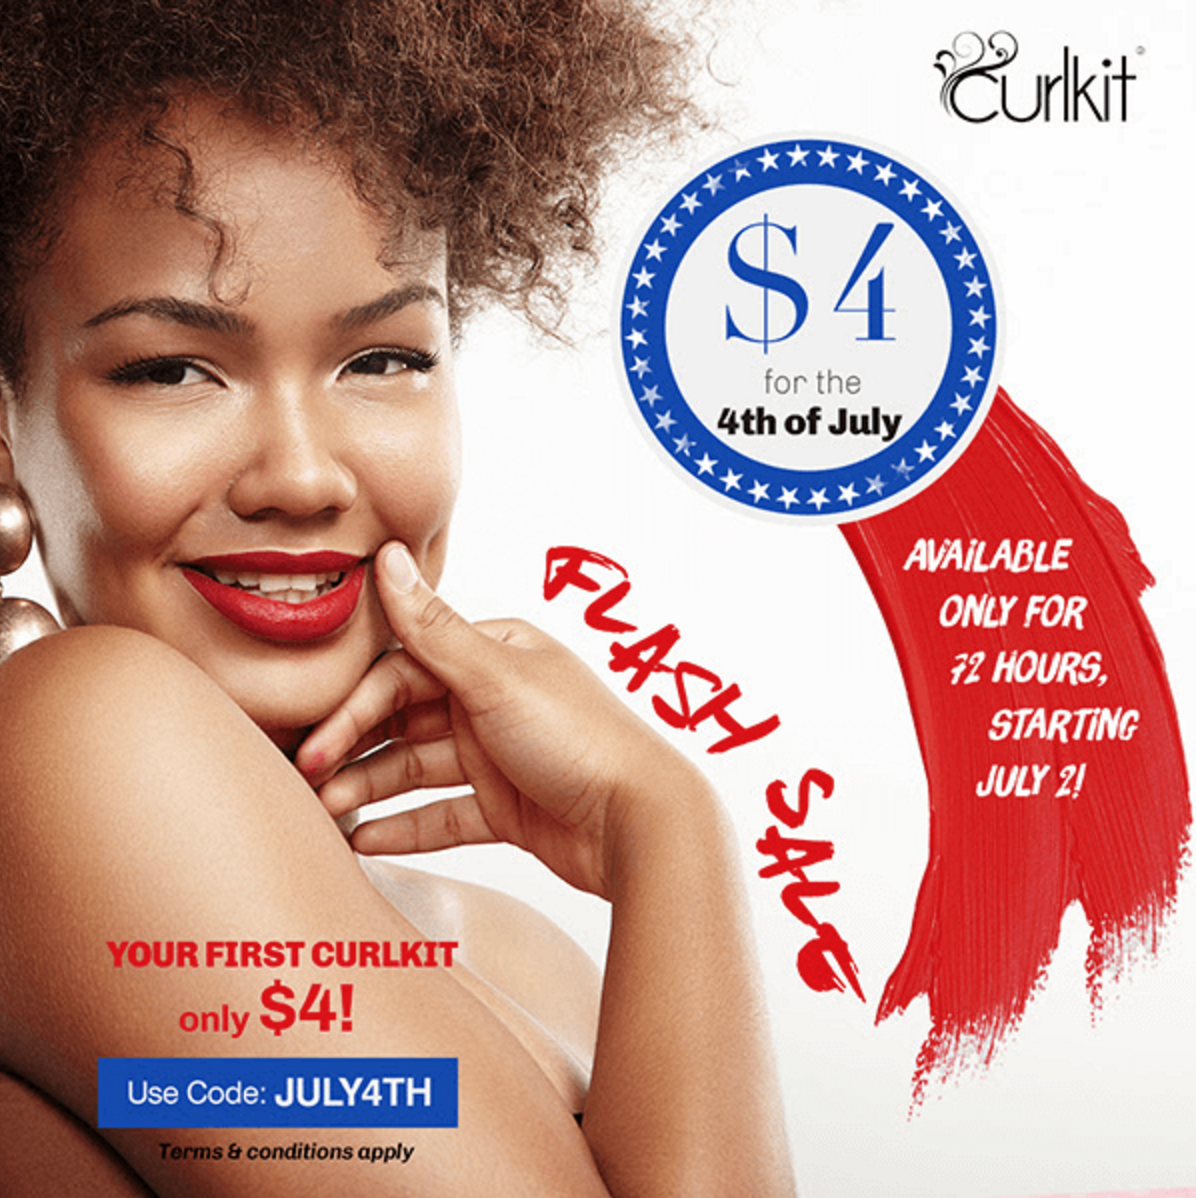 CurlKit 4th of July Sale – Get Your First Box For $4!